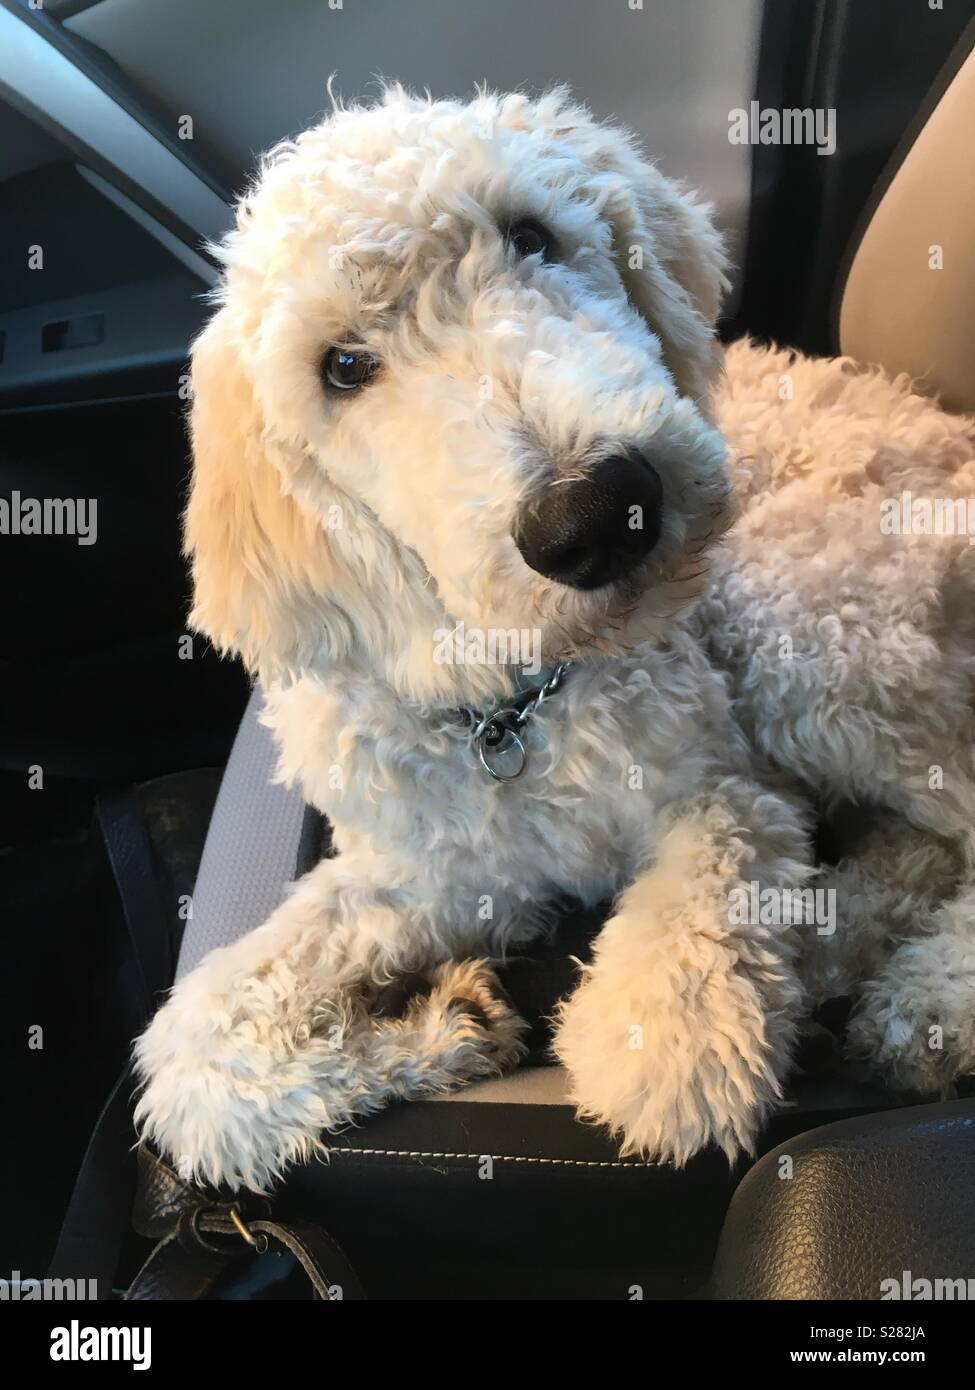 Poodle puppy riding in a car Stock Photo